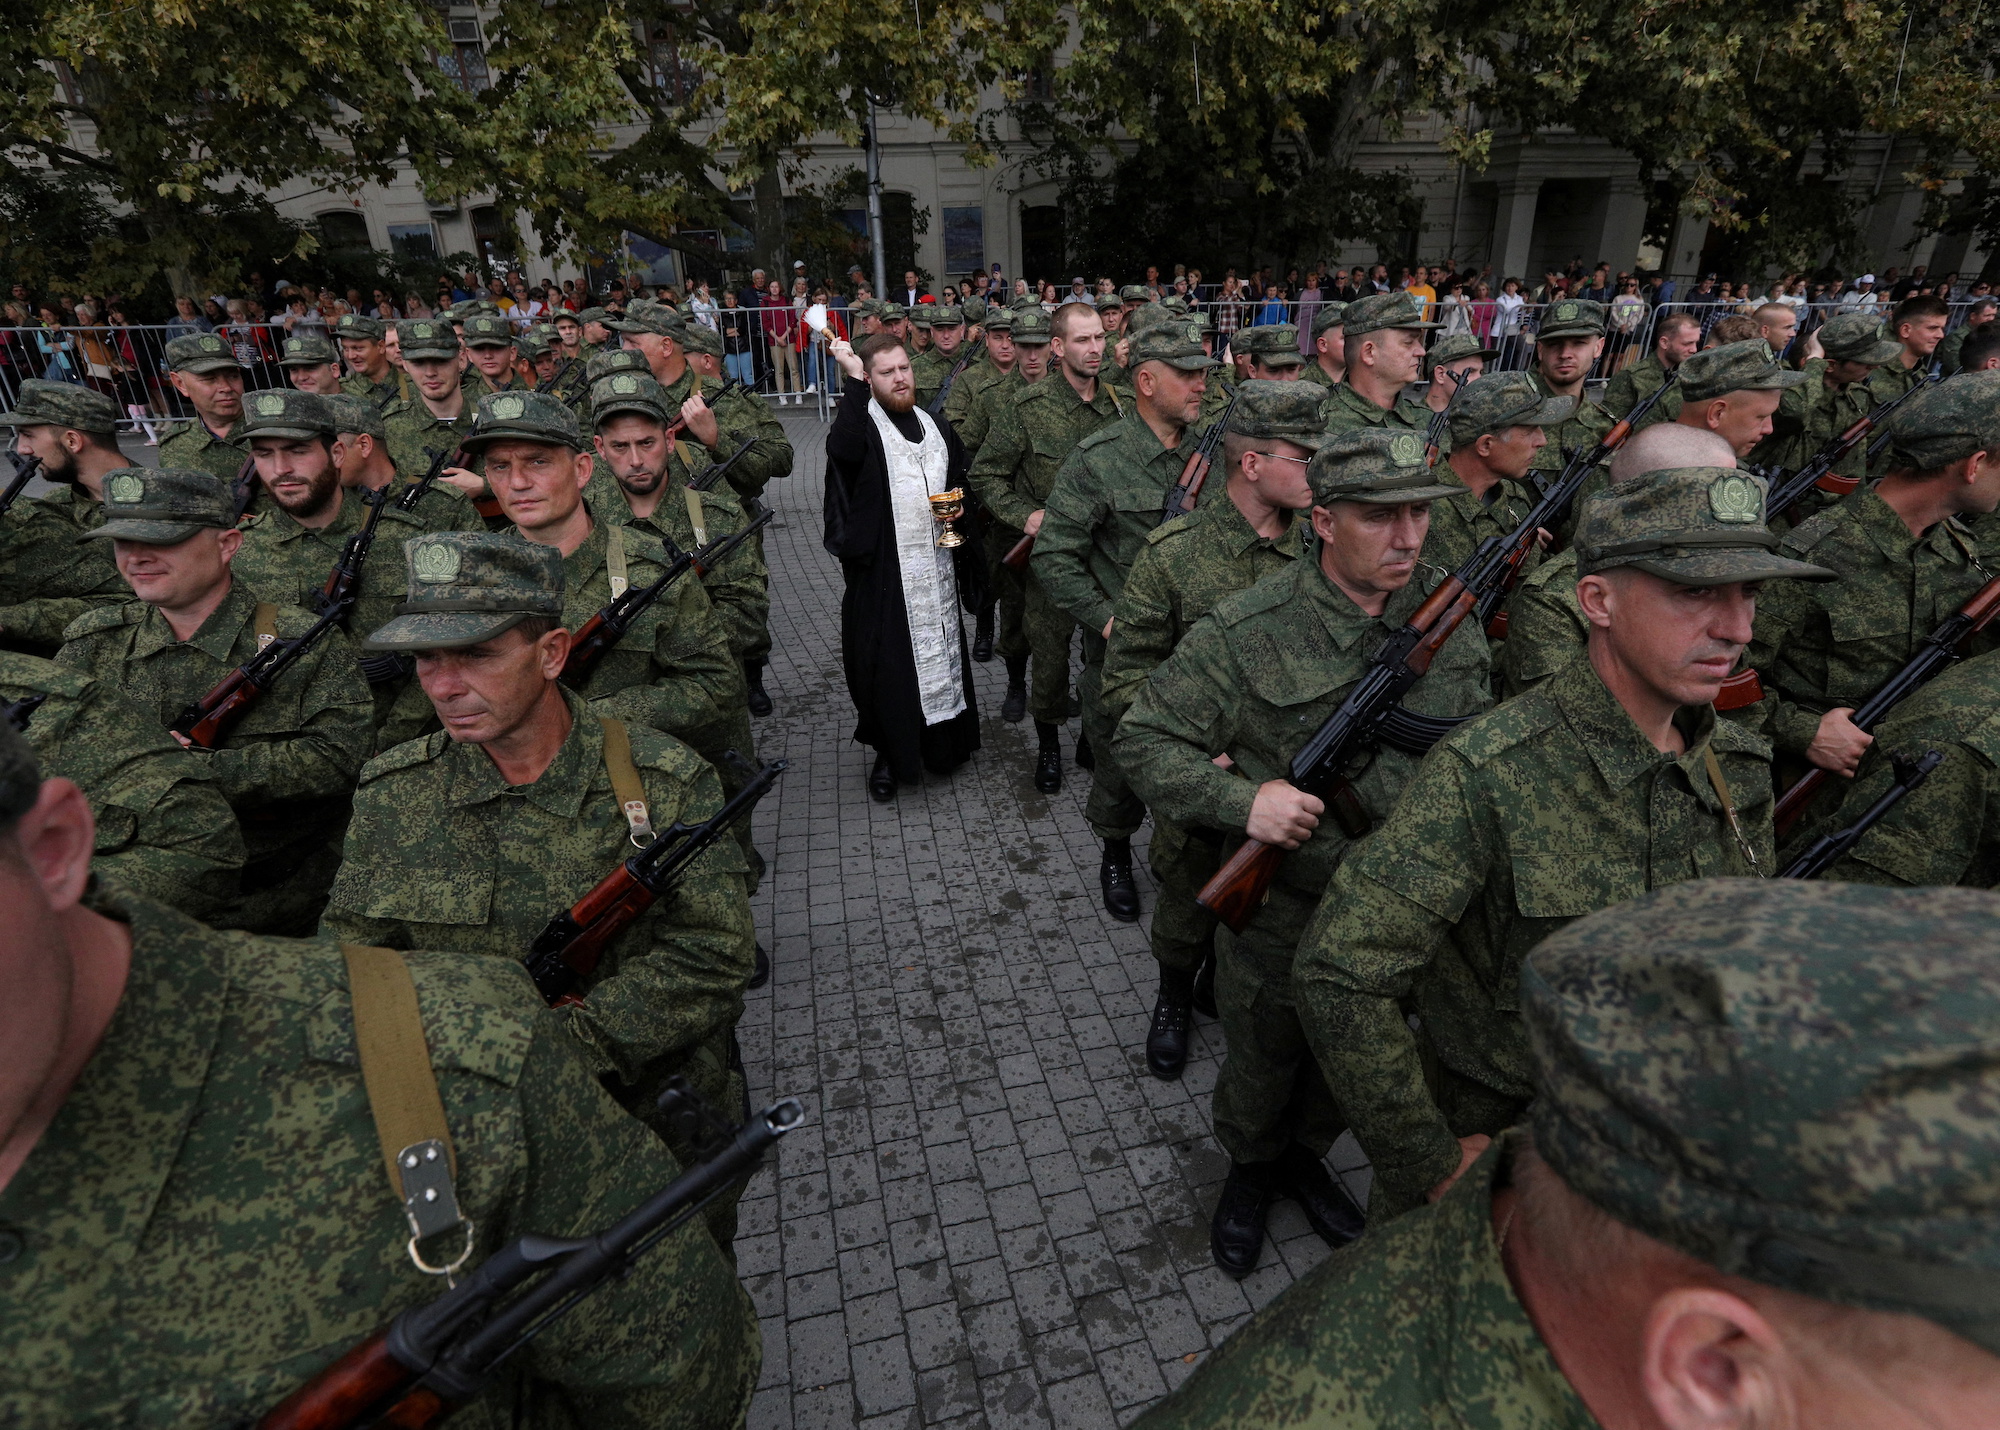 An Orthodox priest conducts a service for reservists drafted as part of the Russian mobilization in Sevastopol, Crimea, on September 27.